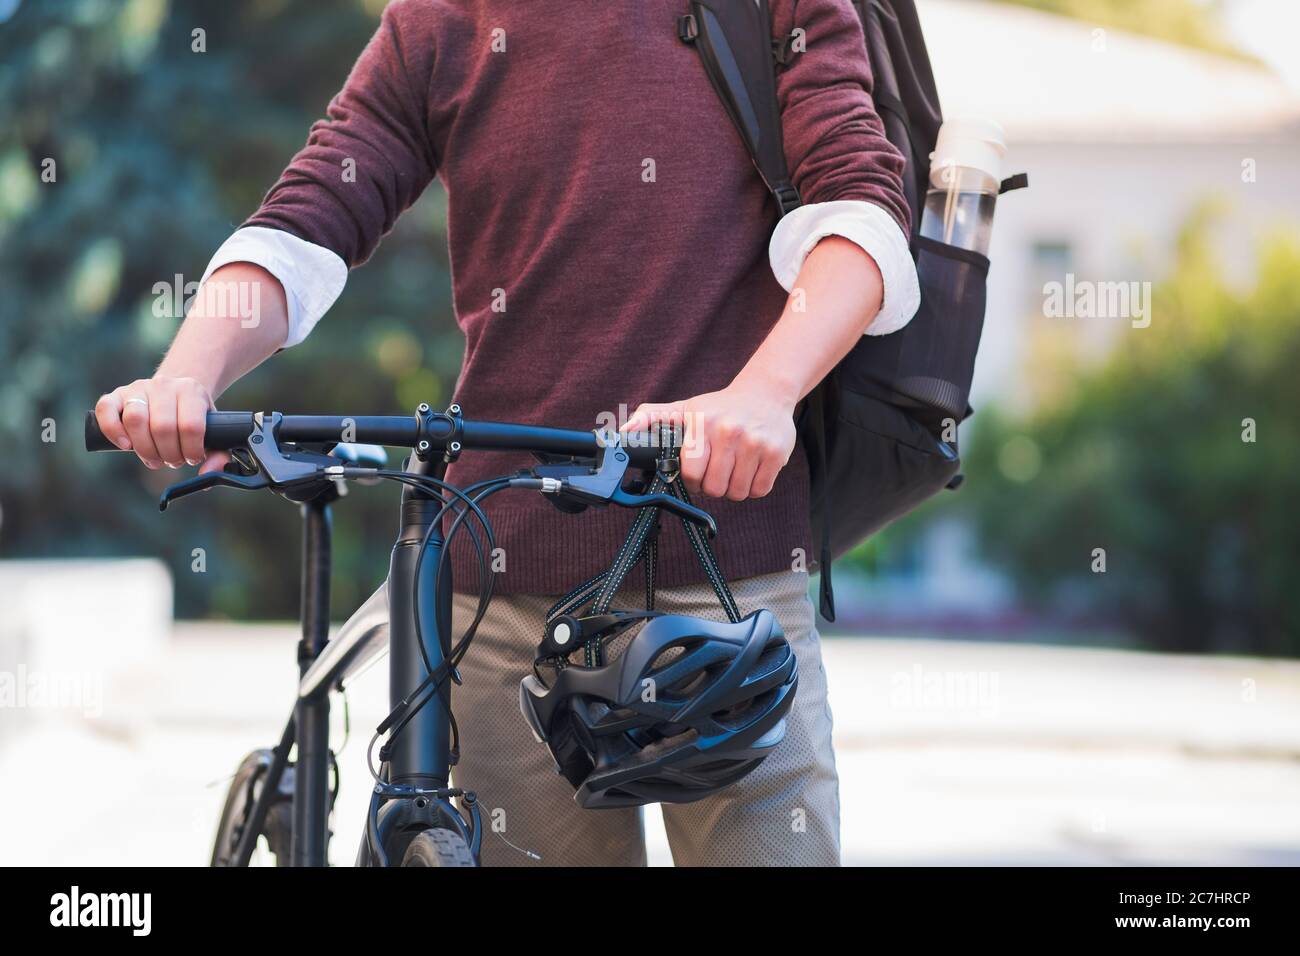 Commuter bike in hands of a male millennial, urban background. Safe cycling in the city, active urban lifestyle concept Stock Photo